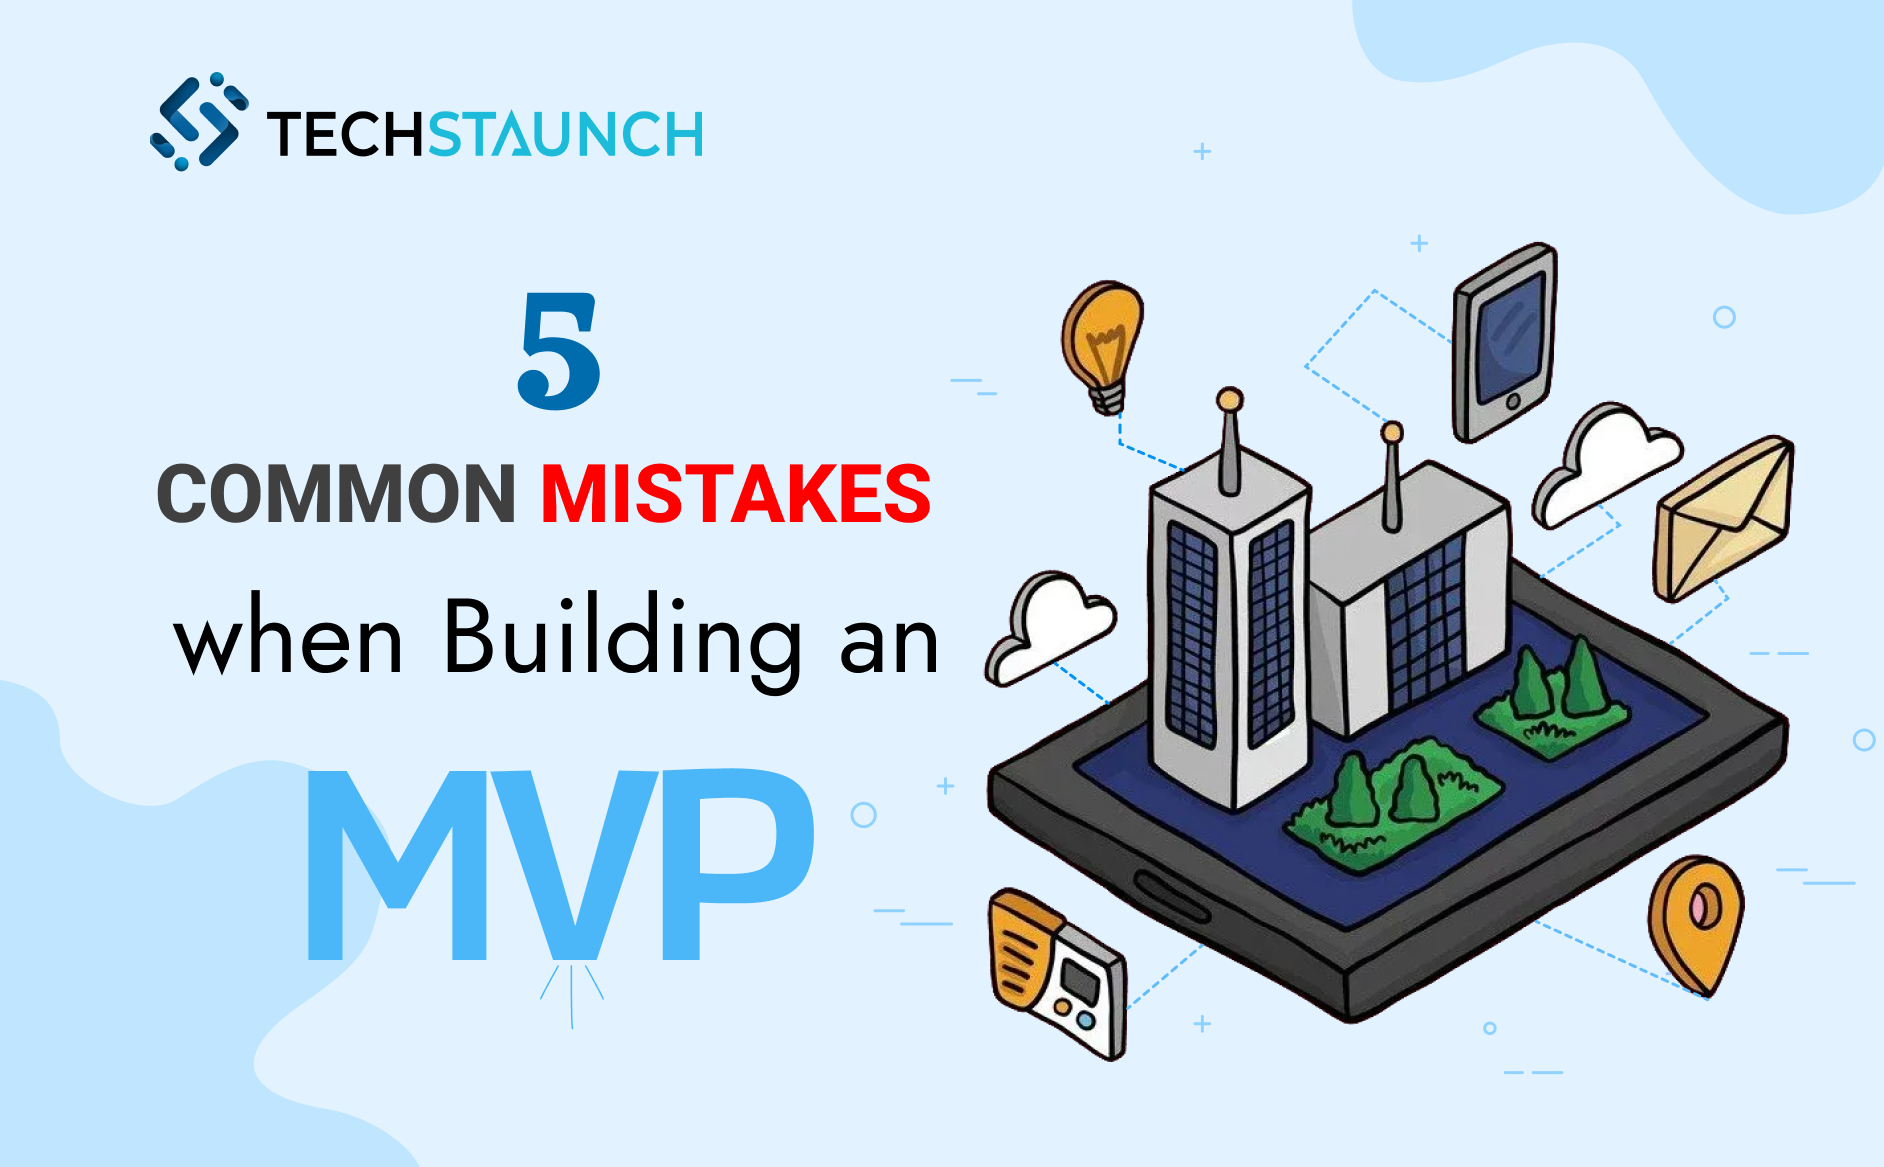 5 common mistakes when building an MVP